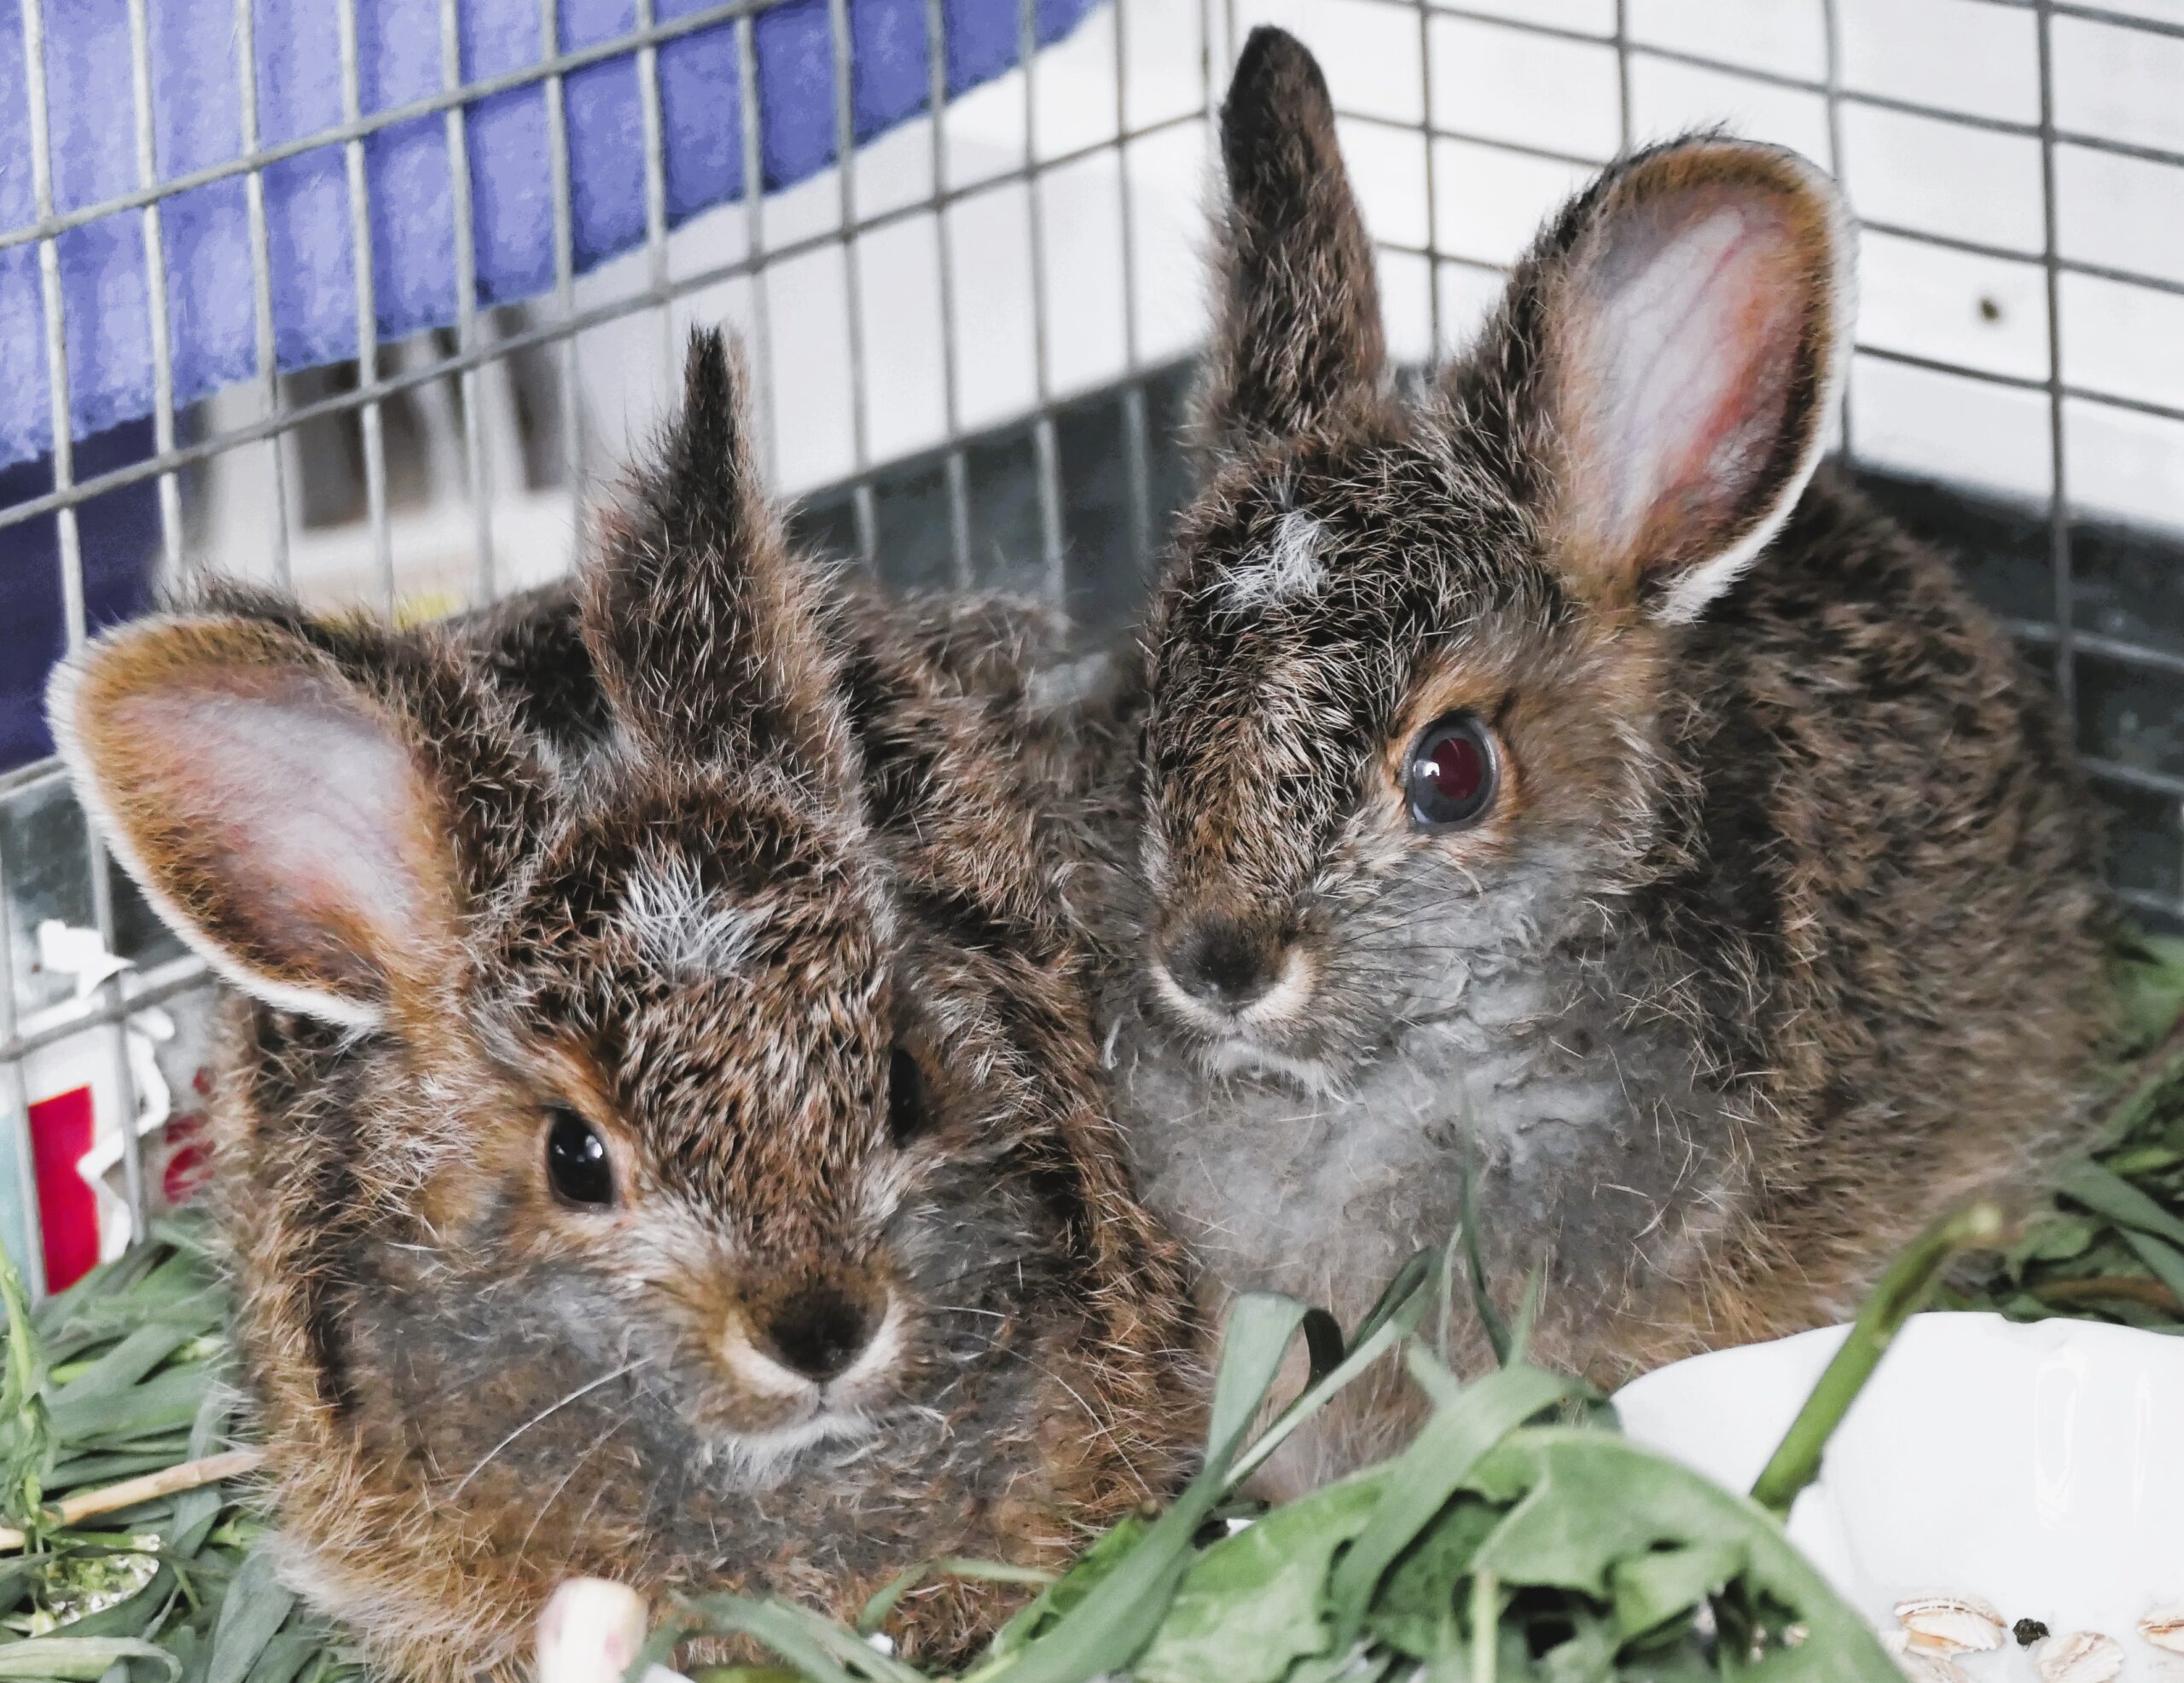 Two Rescued Hares